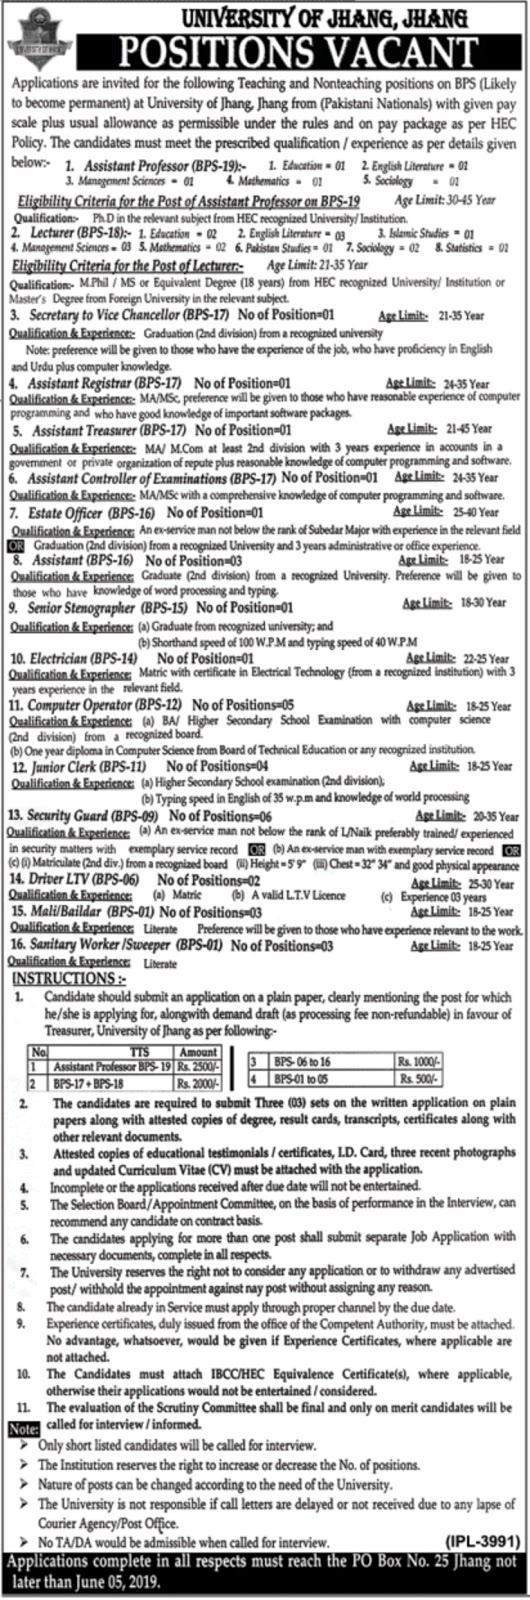 University of Jhang Jobs 2019 For Teaching and Nonteaching Position